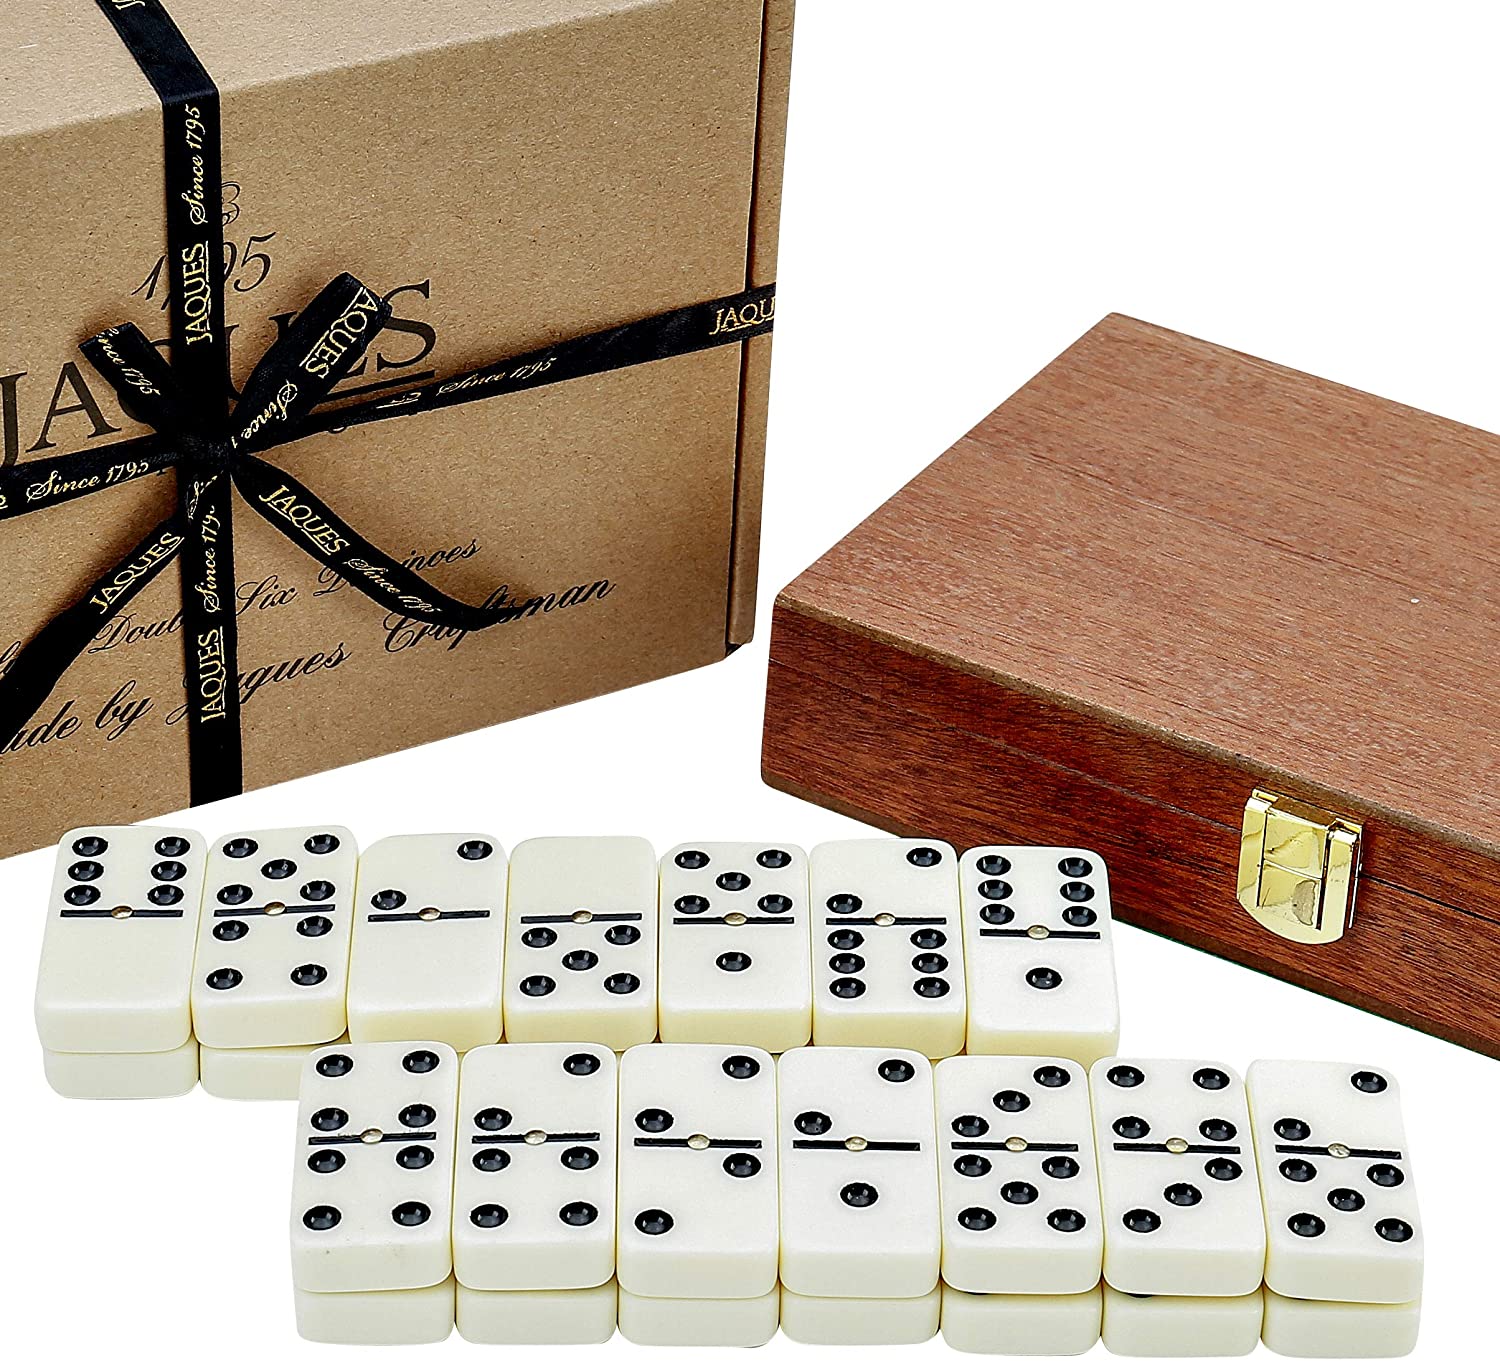 Double Six Dominoes Set in Handmade Mahogany Case Jaques of London Dominoes 